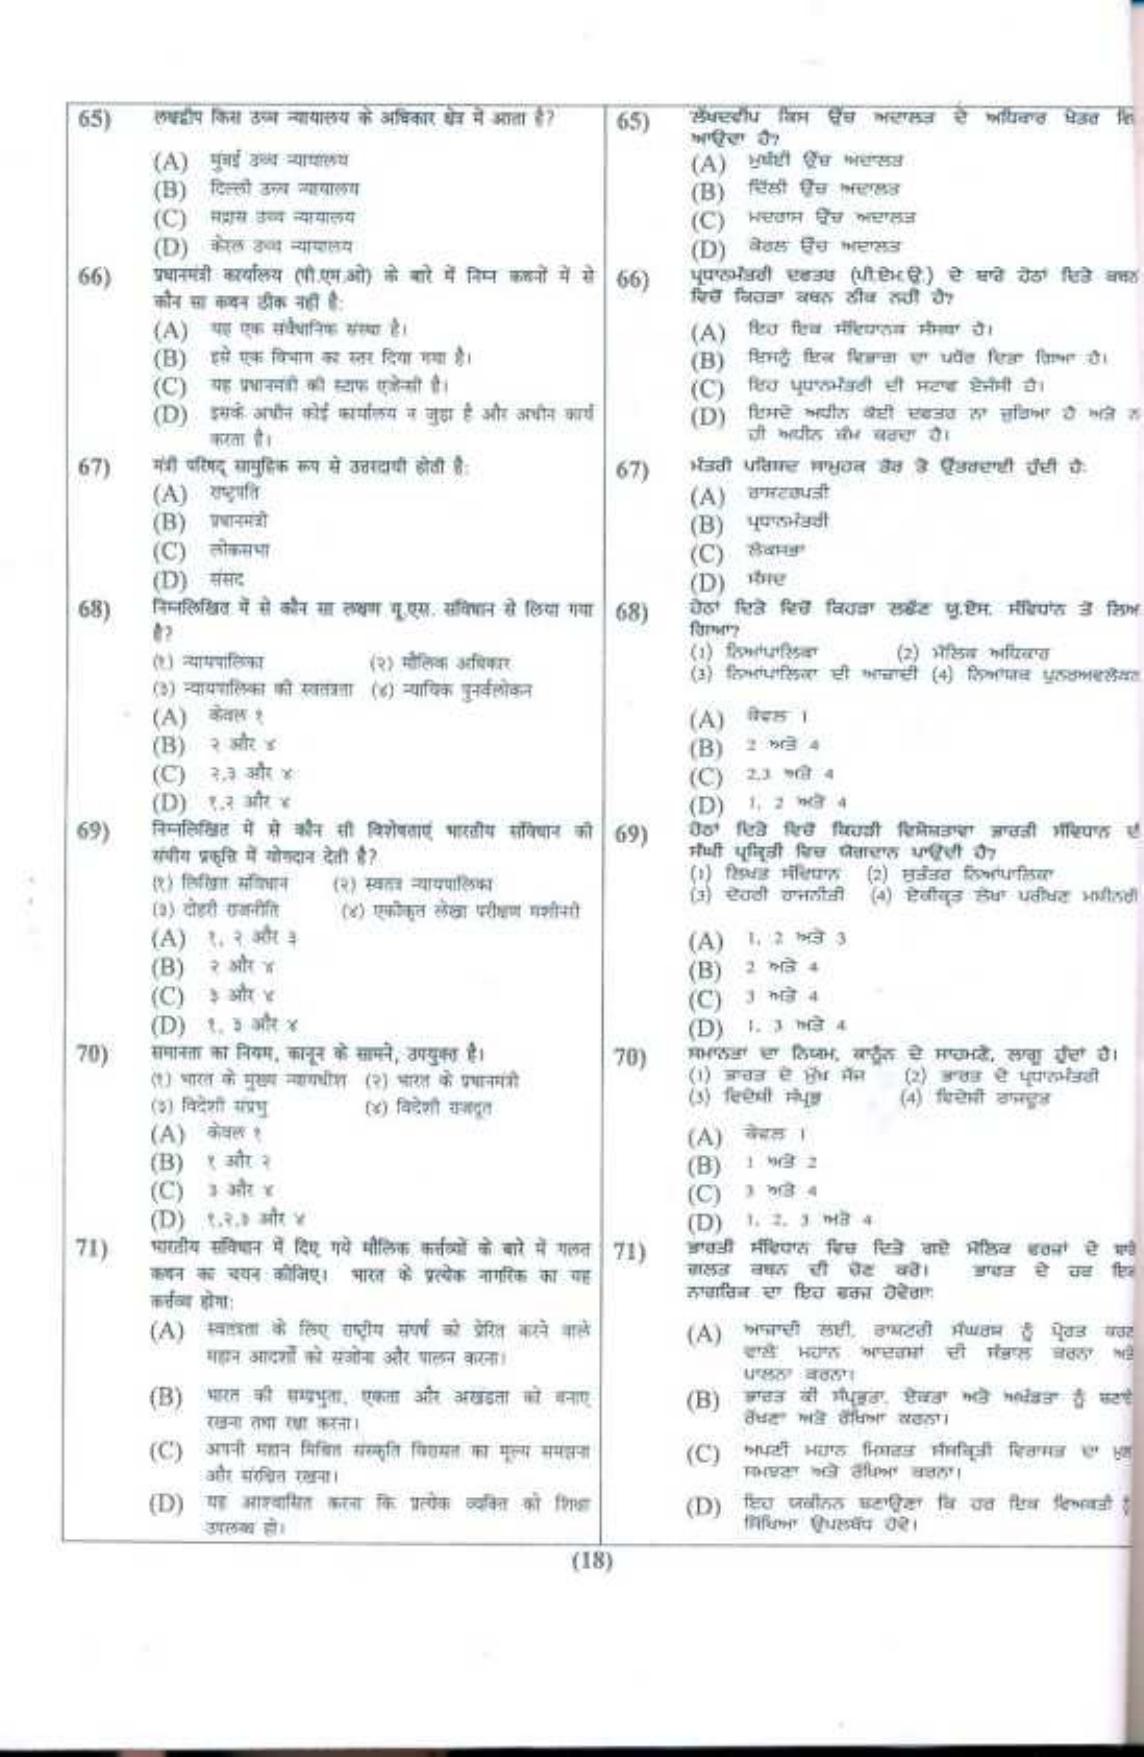 PU LLB 2019 Question Paper - Page 19